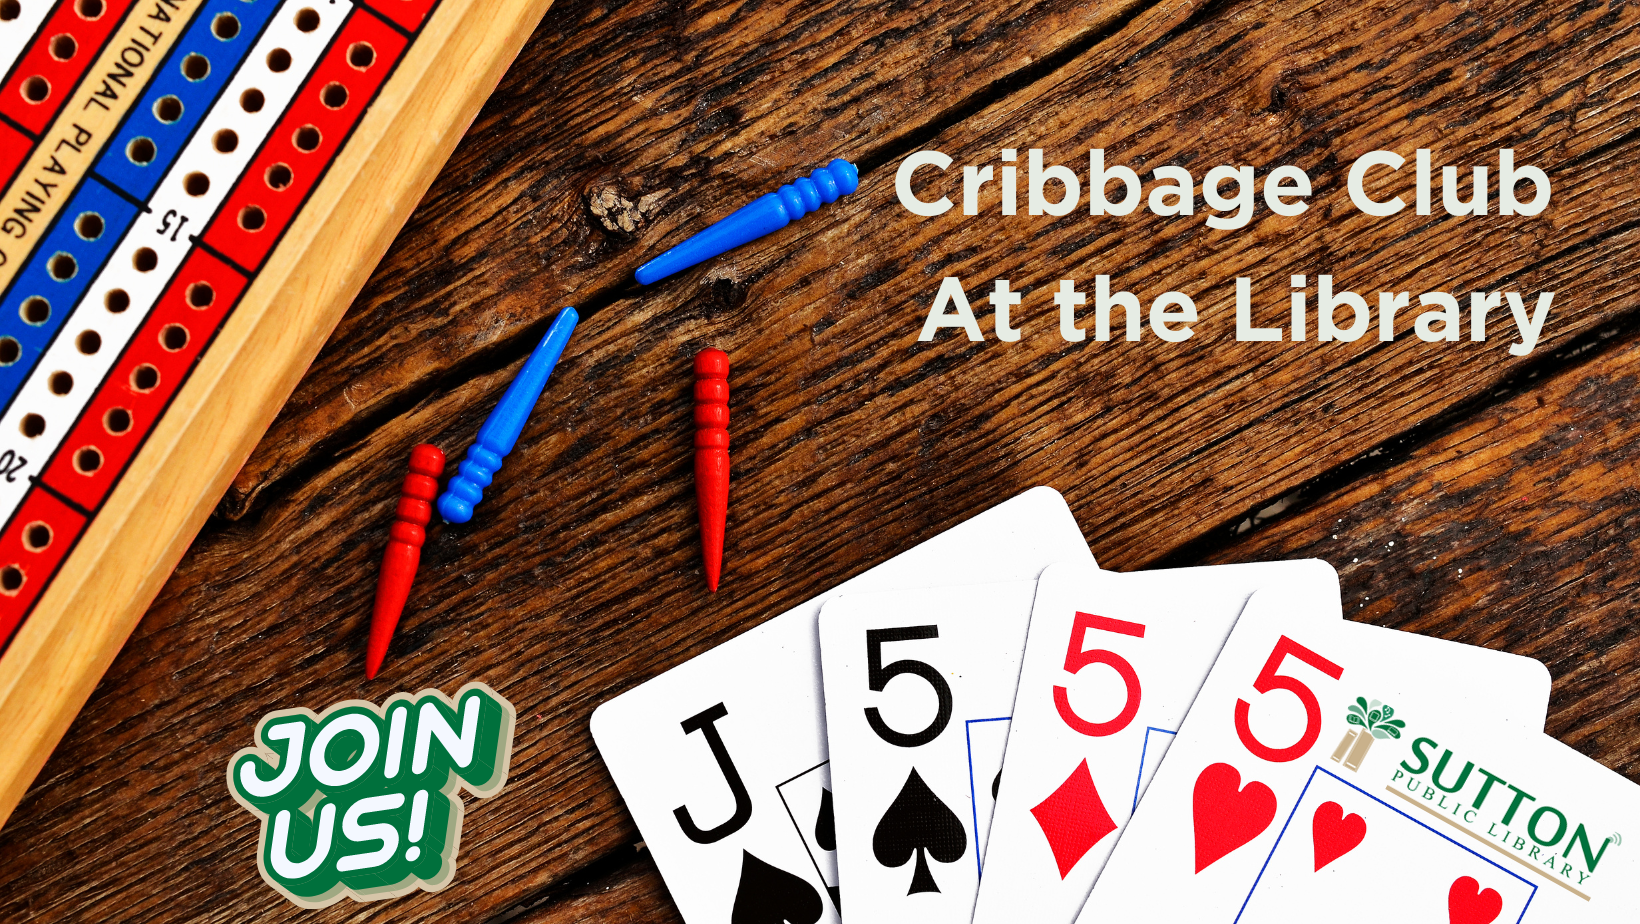 Cribbage Club at the Library